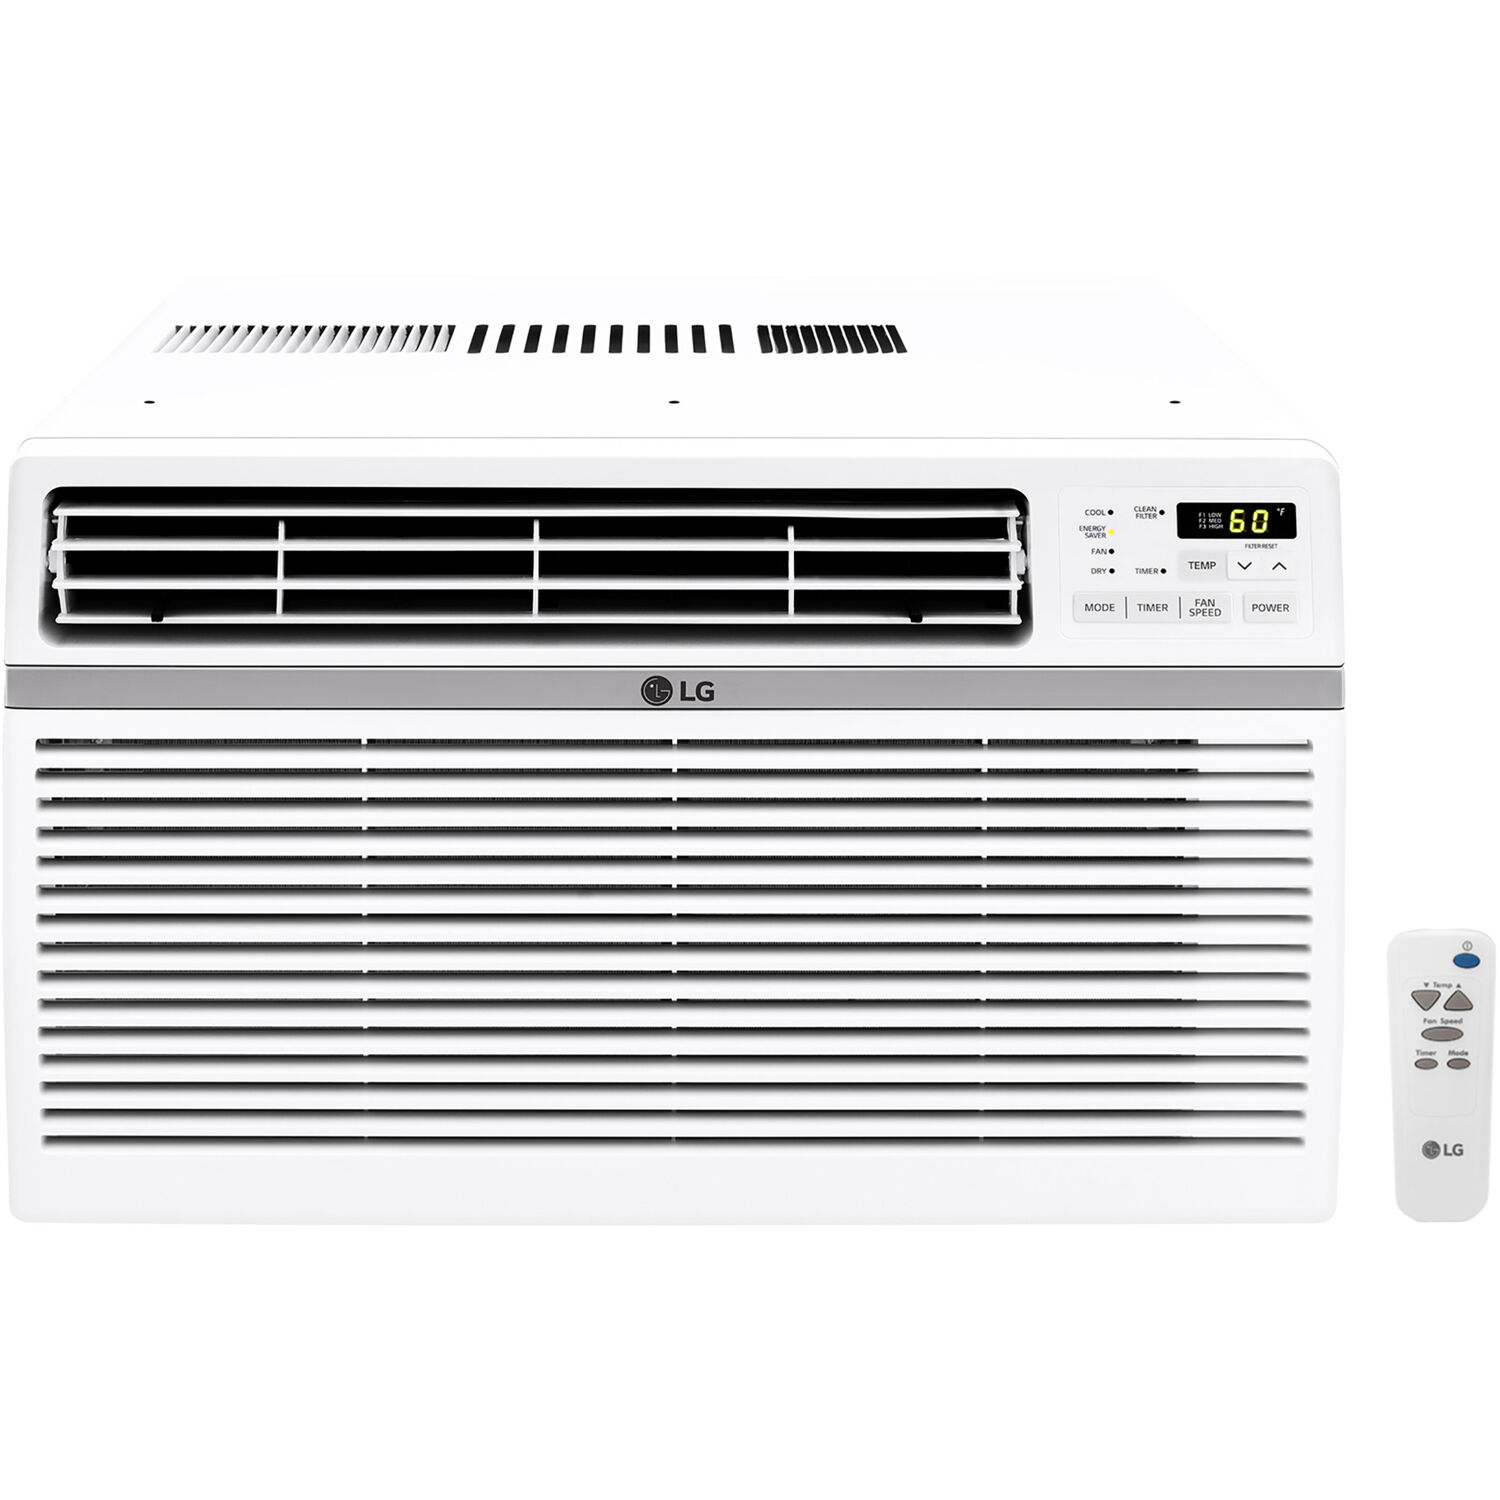 LG 24,500 BTU Window Air Conditioner, 1,560 Sq.ft. (39'x40' Room Size), Remote, 230/208V - image 1 of 11